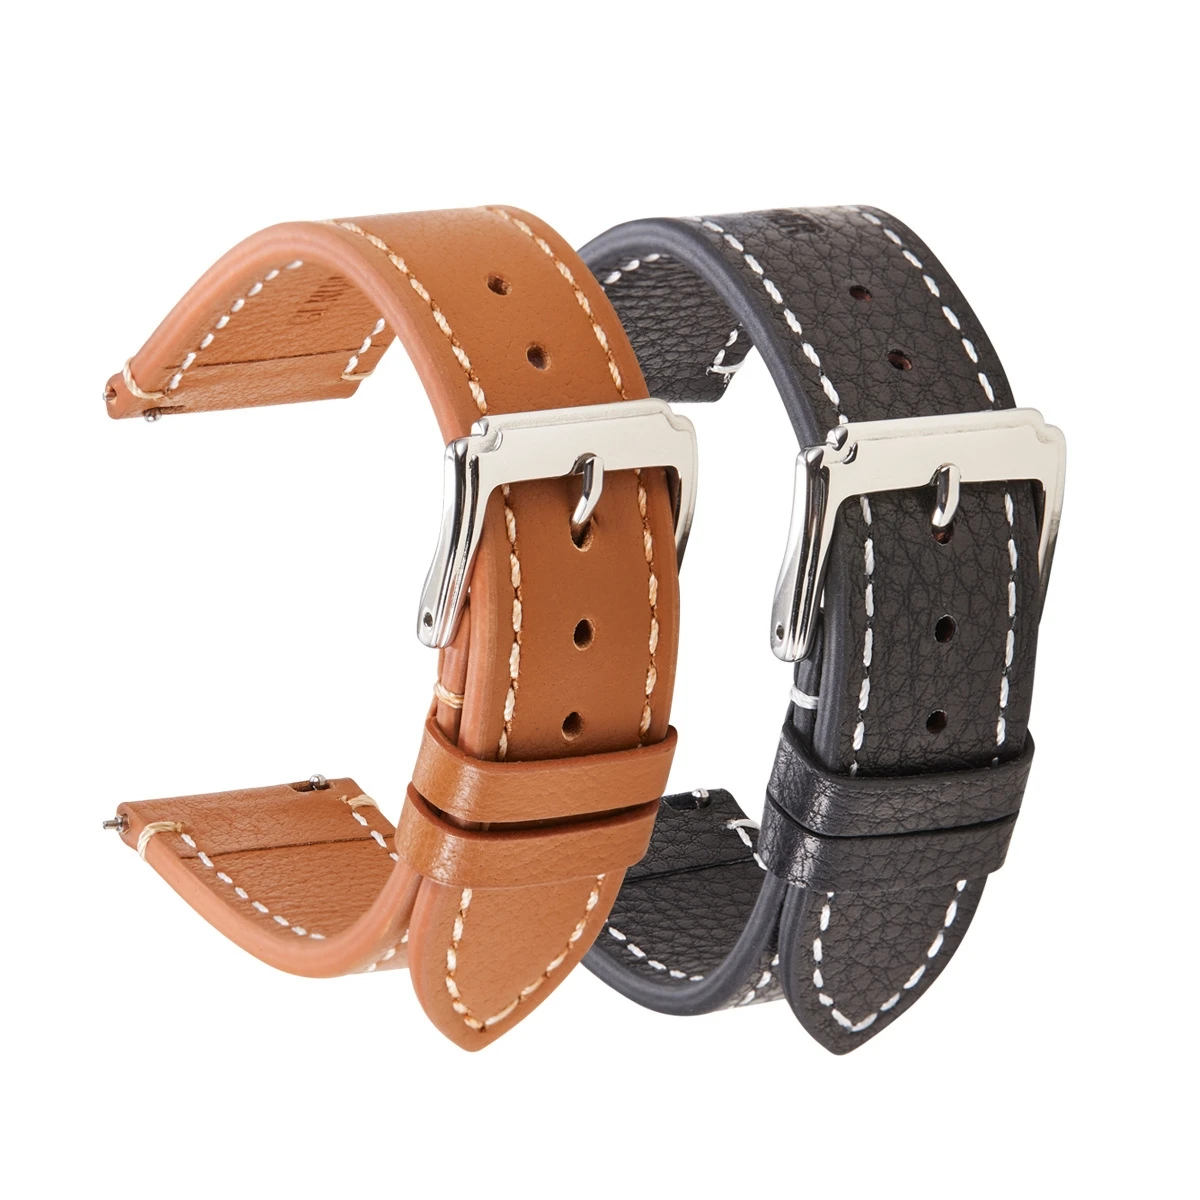 Watch Band Genuine Leather Wrist Strap Watchbands 18mm 19mm 20mm 21mm 22mm Quick Release Watch Accessories